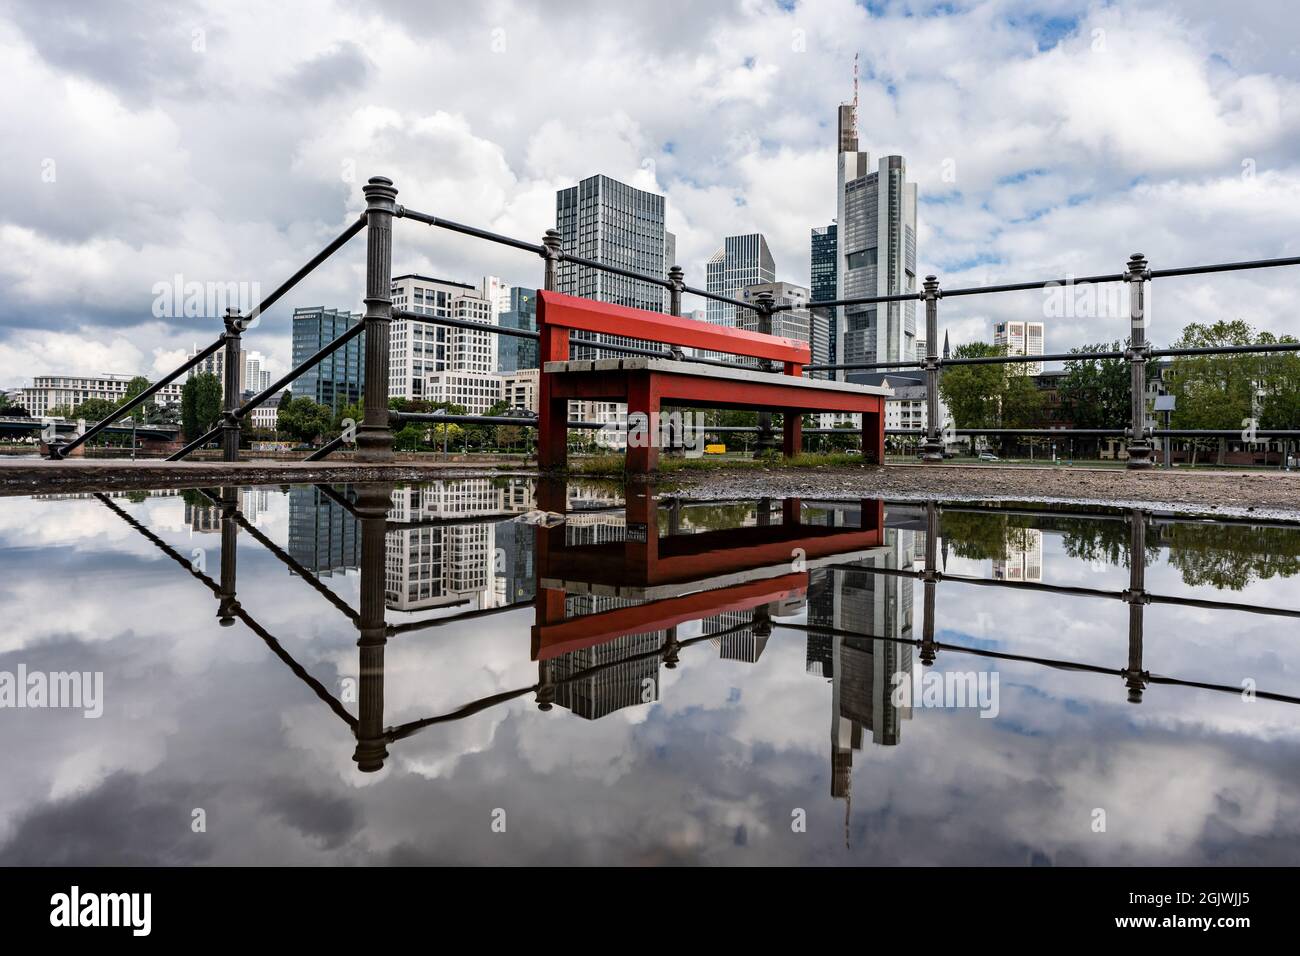 Frankfurt, Germany - June 4, 2021: the famous red bench in front of the frankfurt skyline at the main riverfront Stock Photo